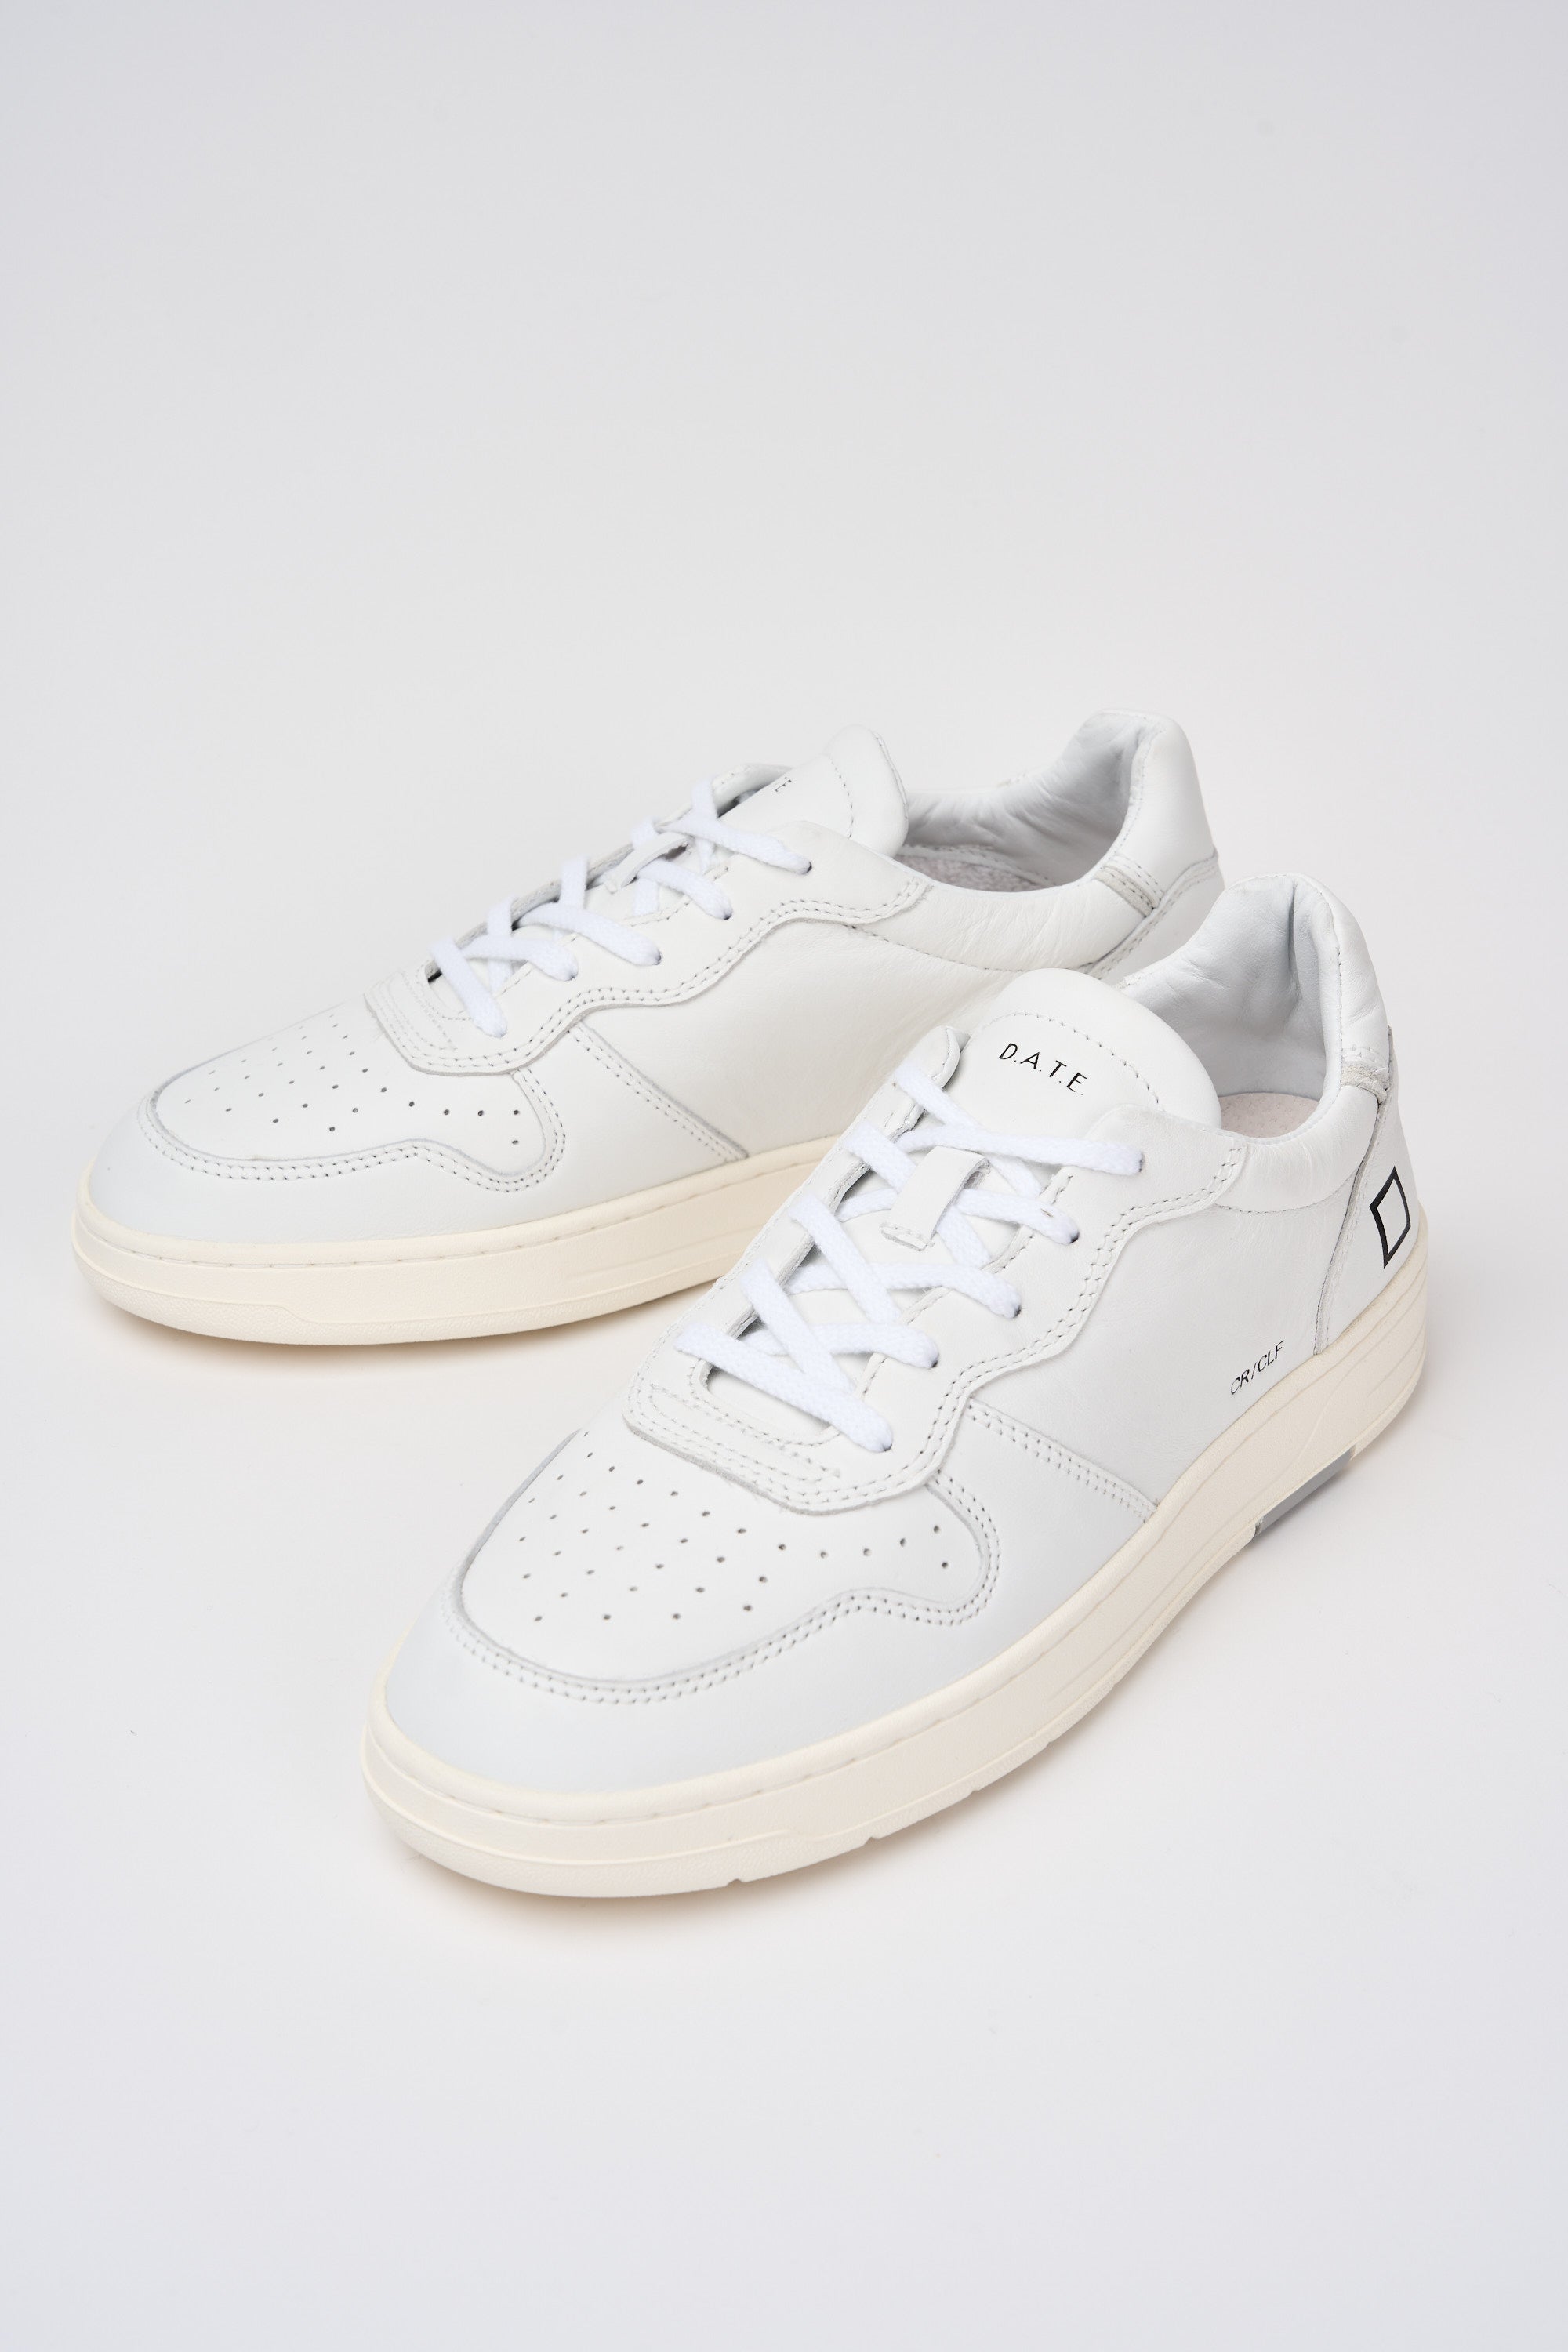 D.A.T.E. Sneaker Court White Leather-7